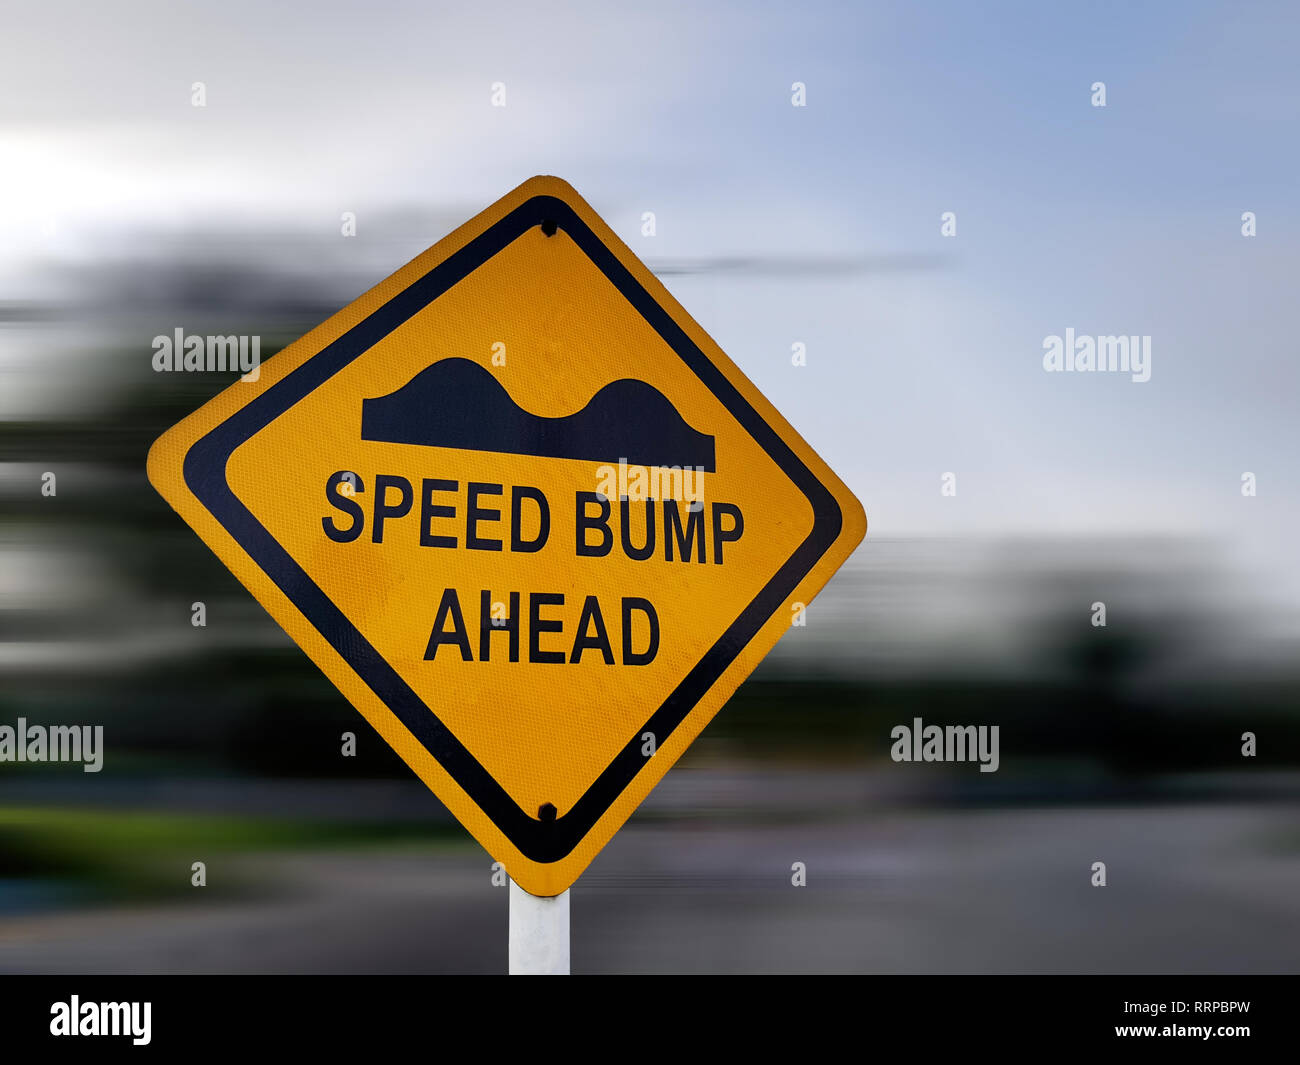 Speed Bump Sign - Yellow Road Traffic Warning Sign, on a Speeding Blurred Background Stock Photo